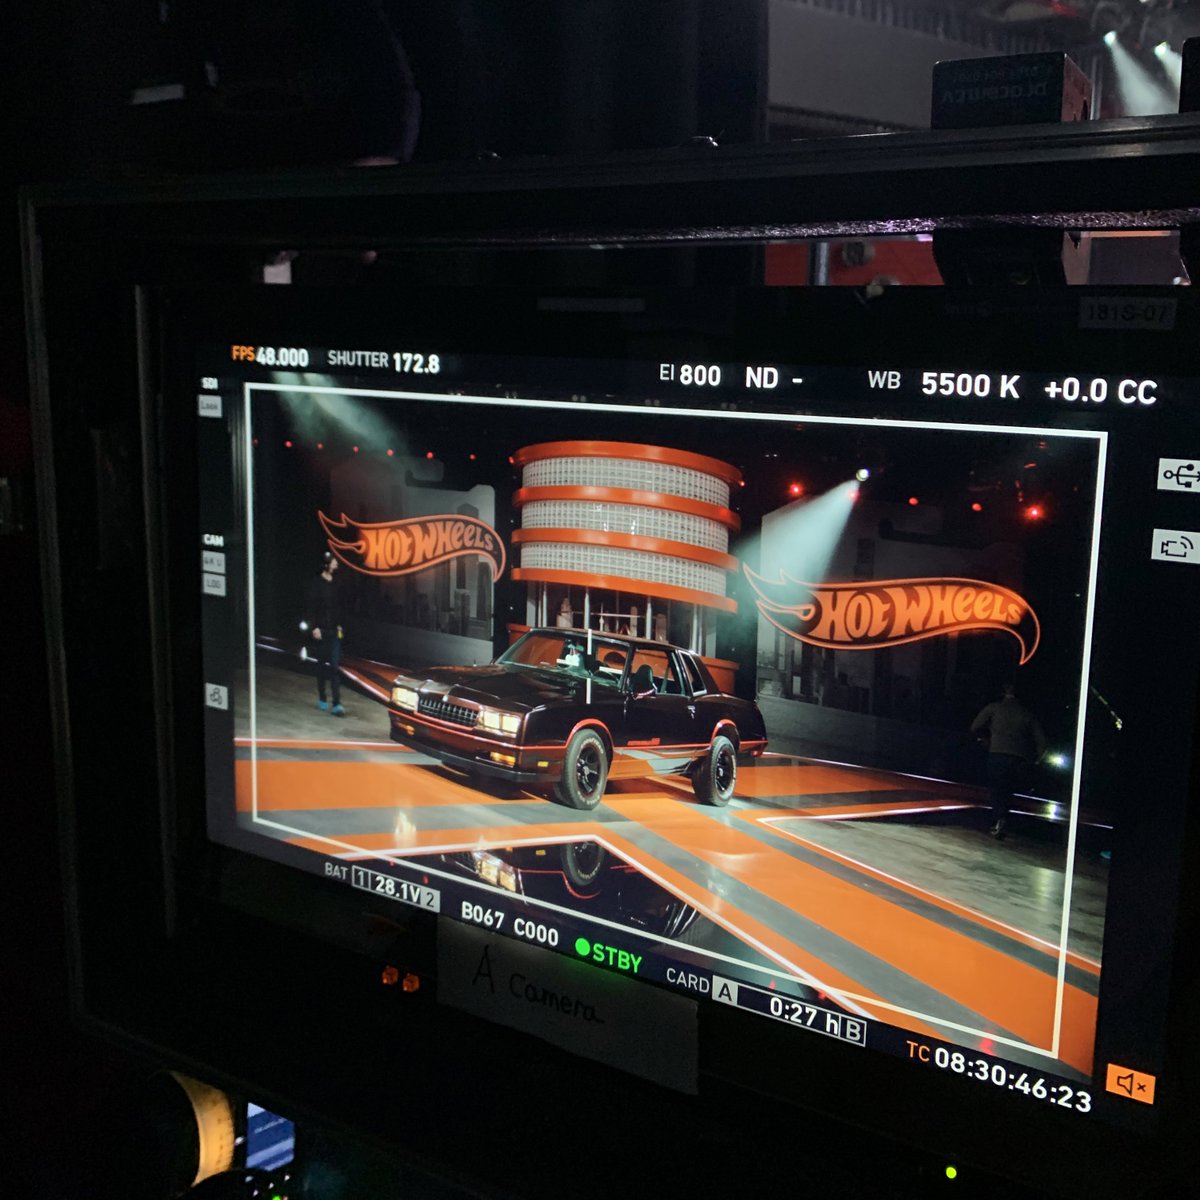 I’ve had a great time over the last two months working on Hot Wheels: Ultimate Challenge, premiering on @NBC on May 30th 🙌 I loved coming to work every day on this & that was made possible by the genuinely lovely people I had the pleasure to meet and work with throughout 😄